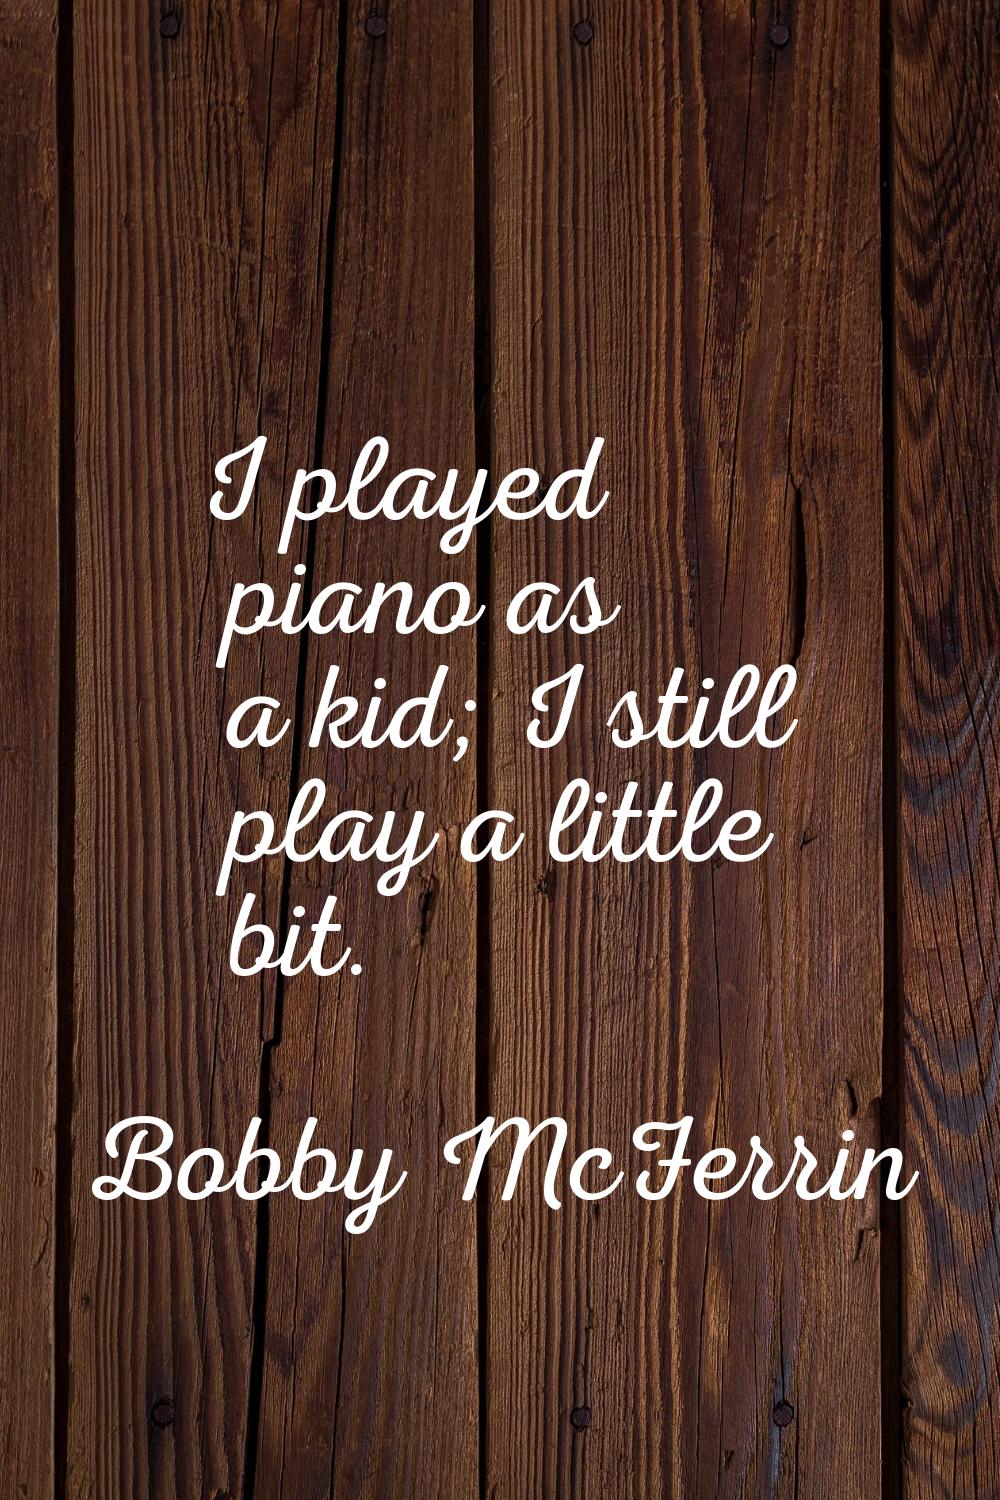 I played piano as a kid; I still play a little bit.